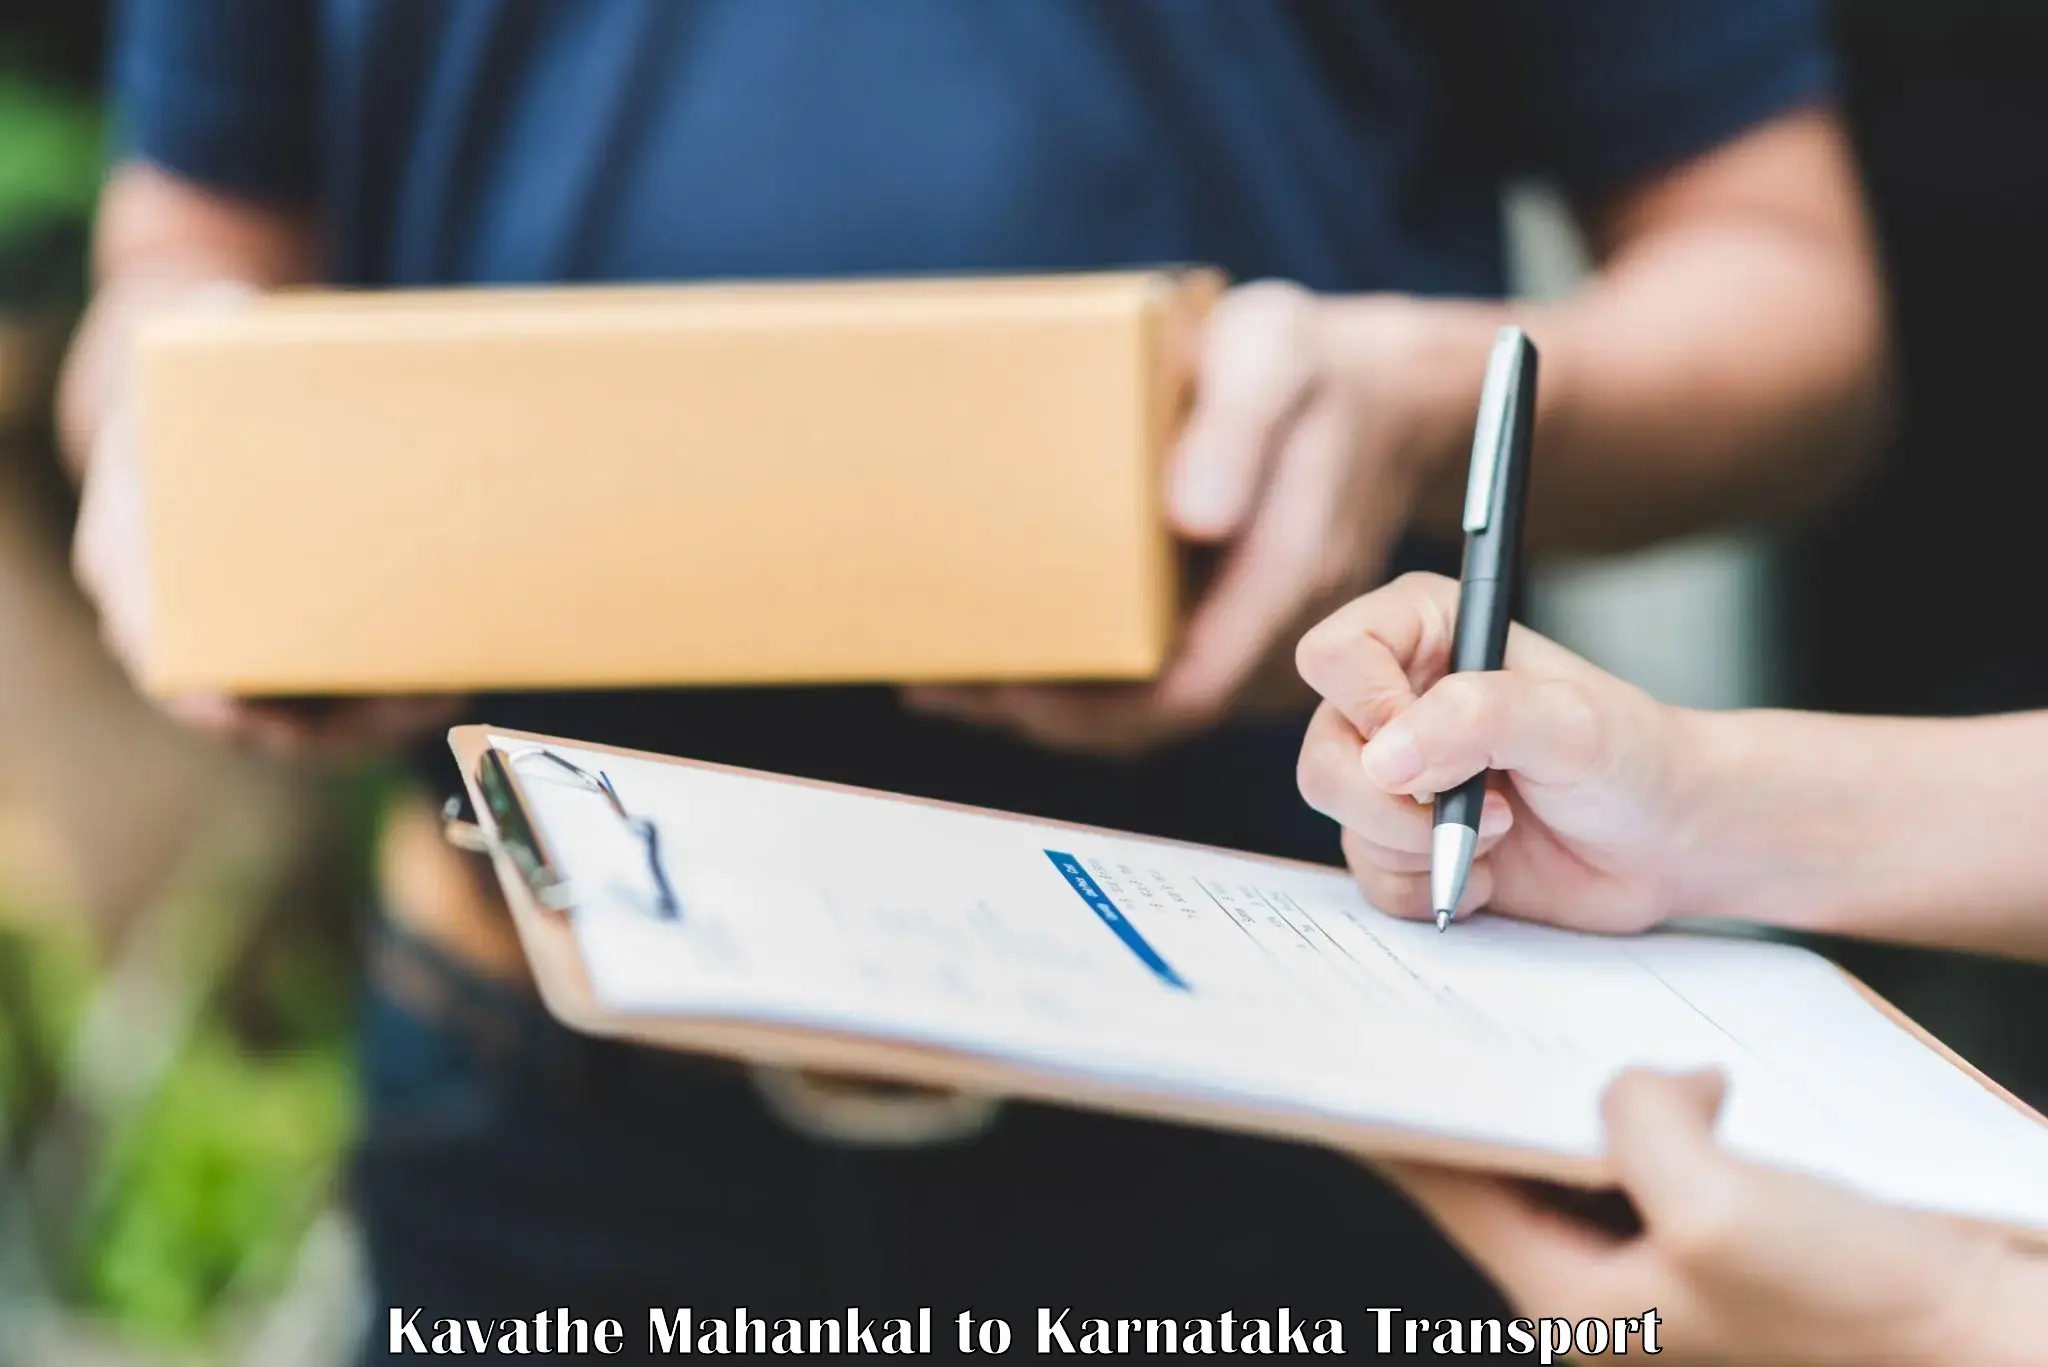 Vehicle courier services Kavathe Mahankal to Kollegal